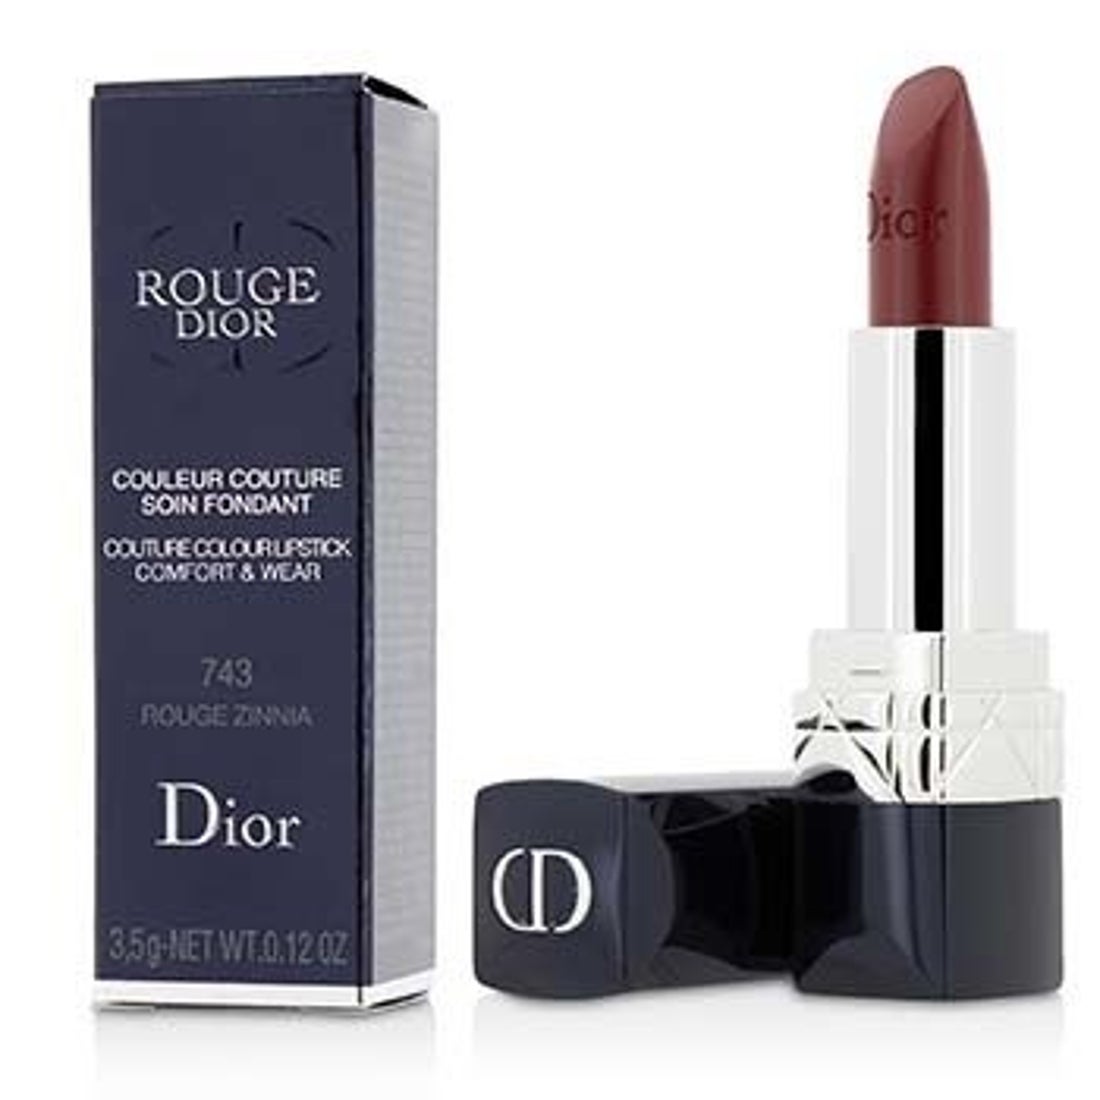 rouge dior 743 rouge zinnia